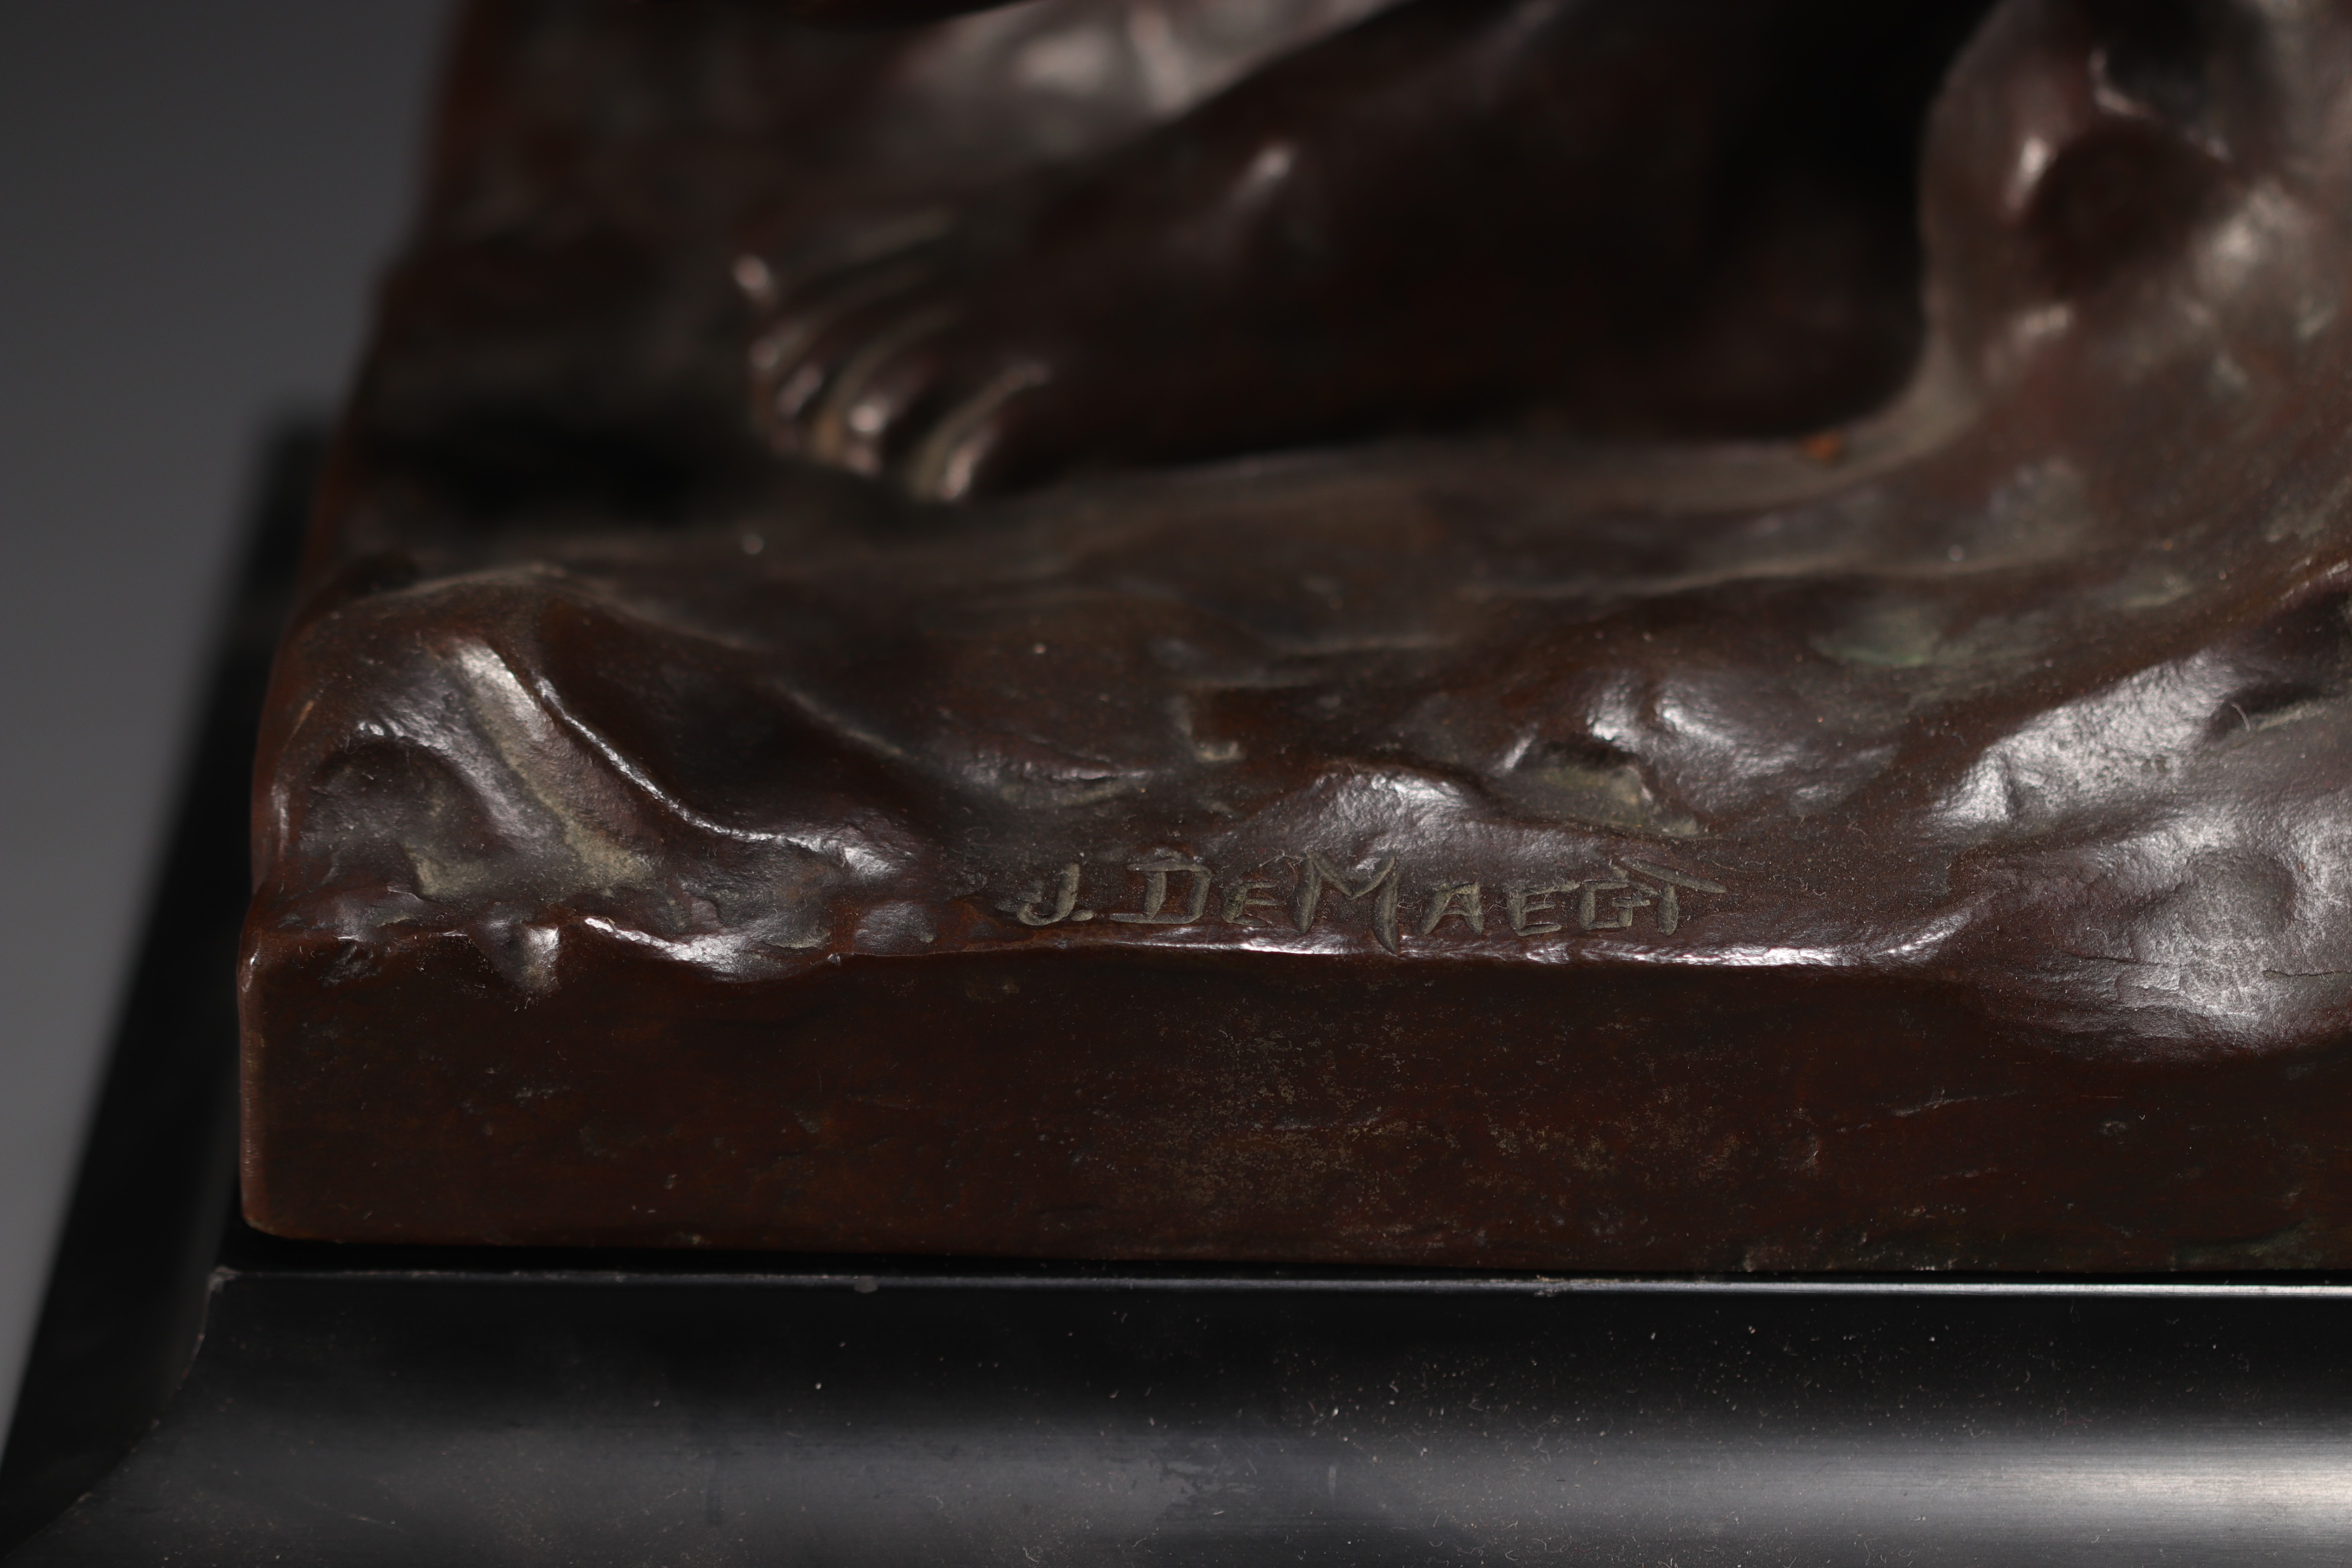 Johan DE MAEGT (1906-1987) "Reclining nude woman" Imposing sculpture in bronze with brown patina on  - Image 3 of 4